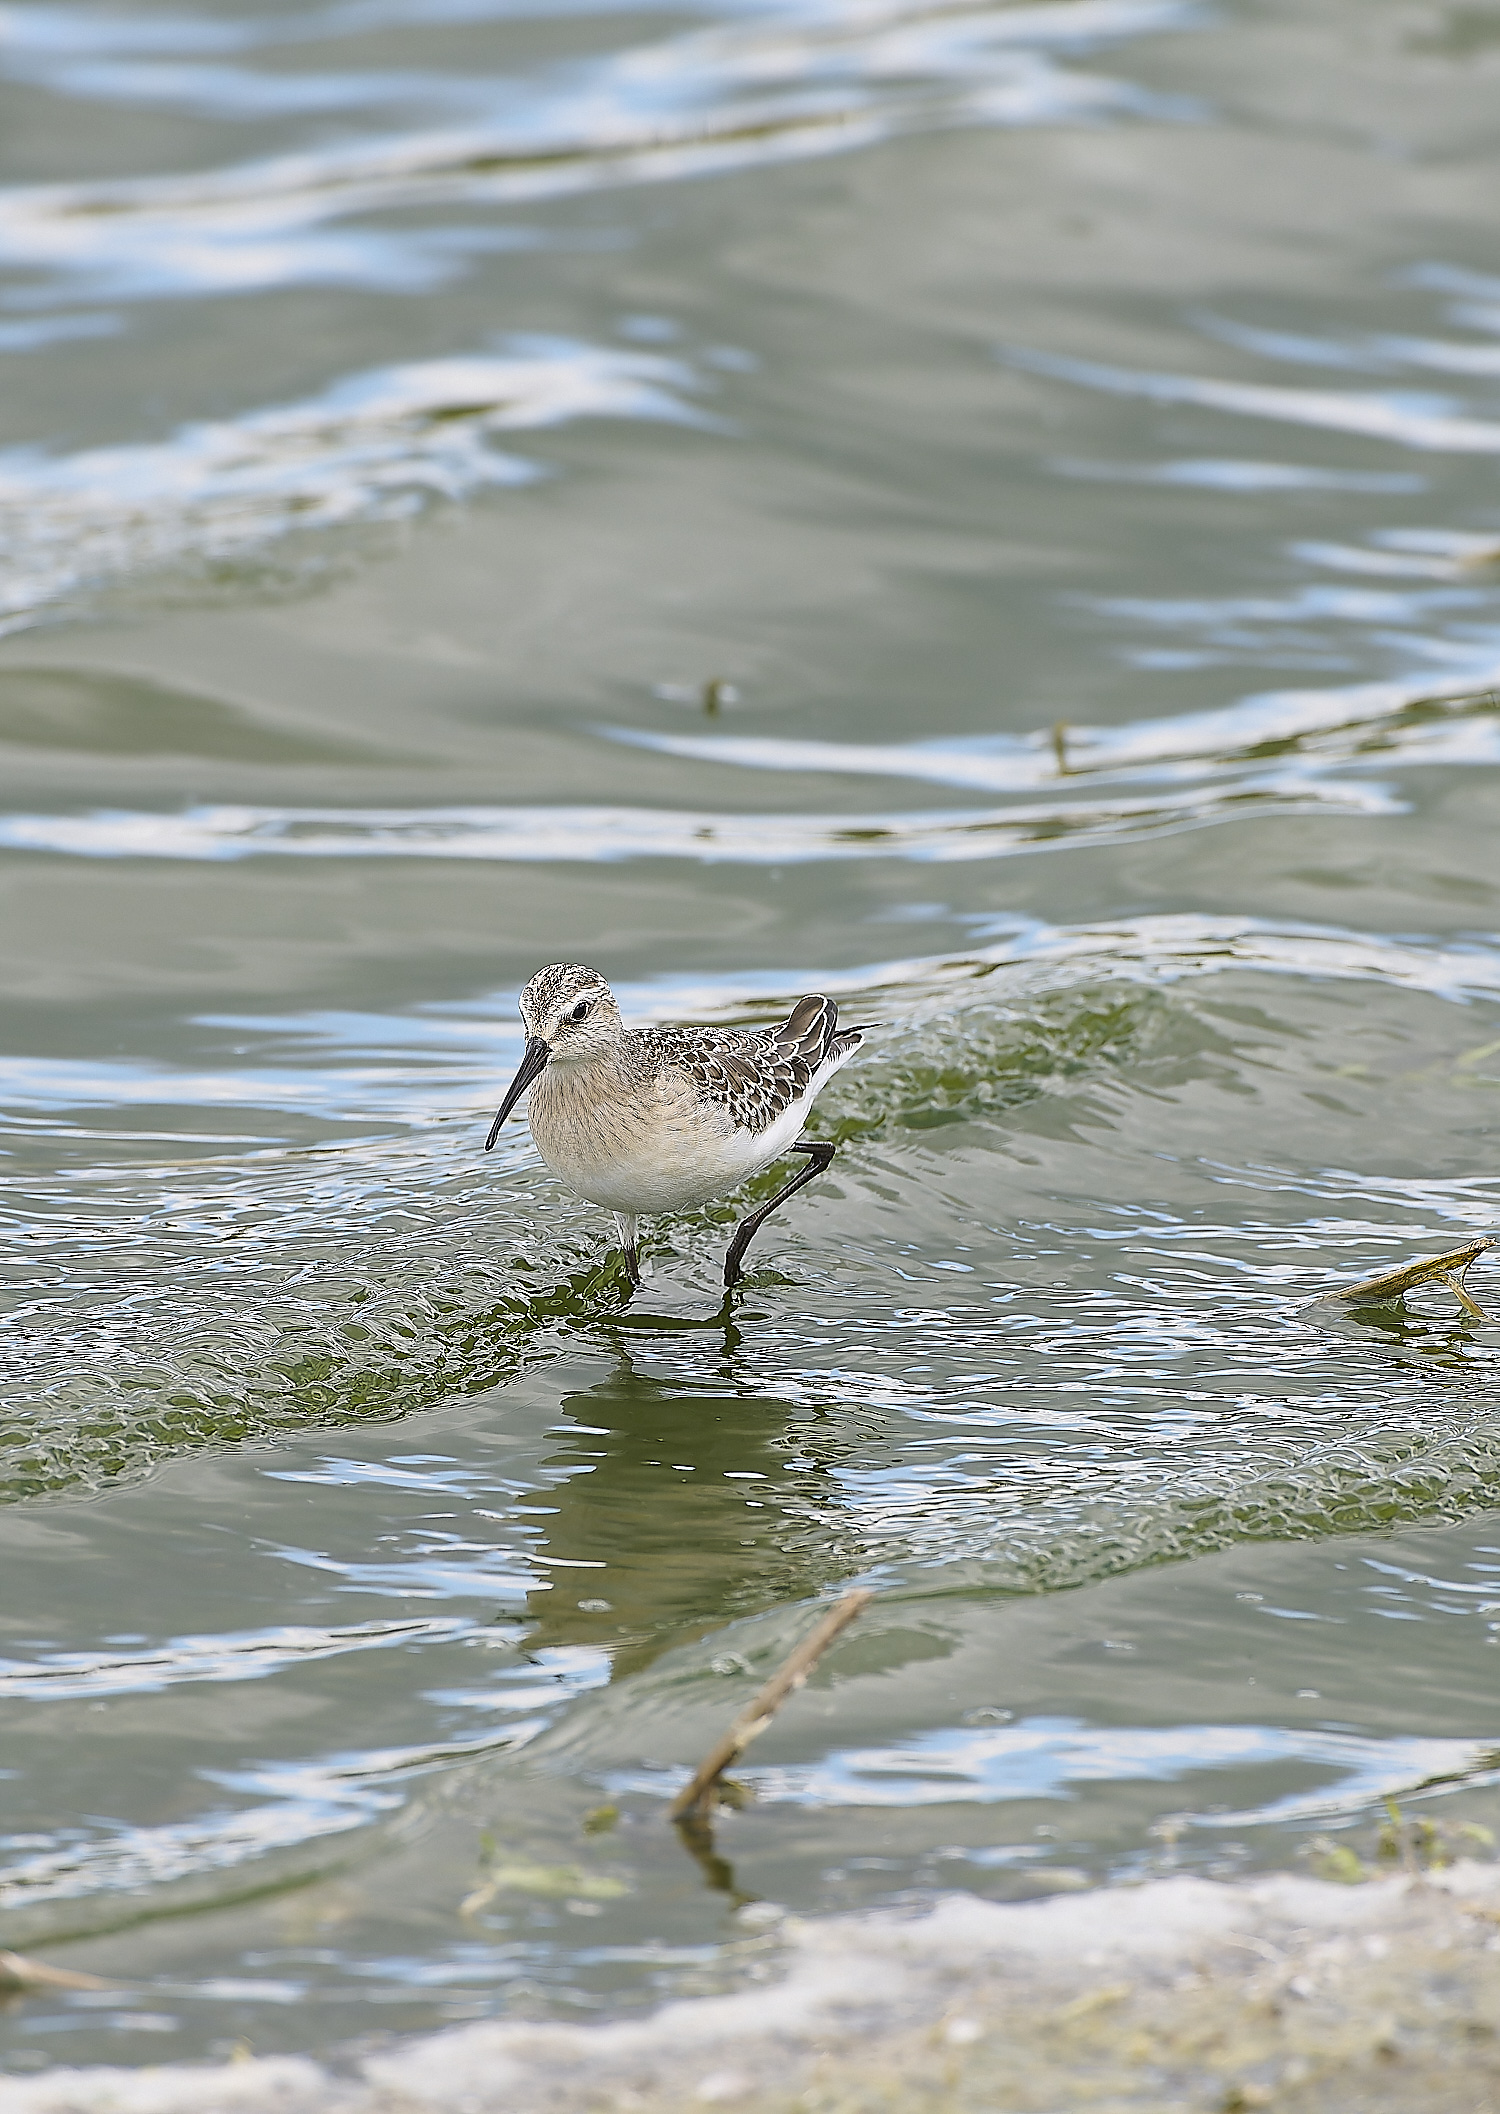 CantleyCurlewSandpiper050920-5-NEF-